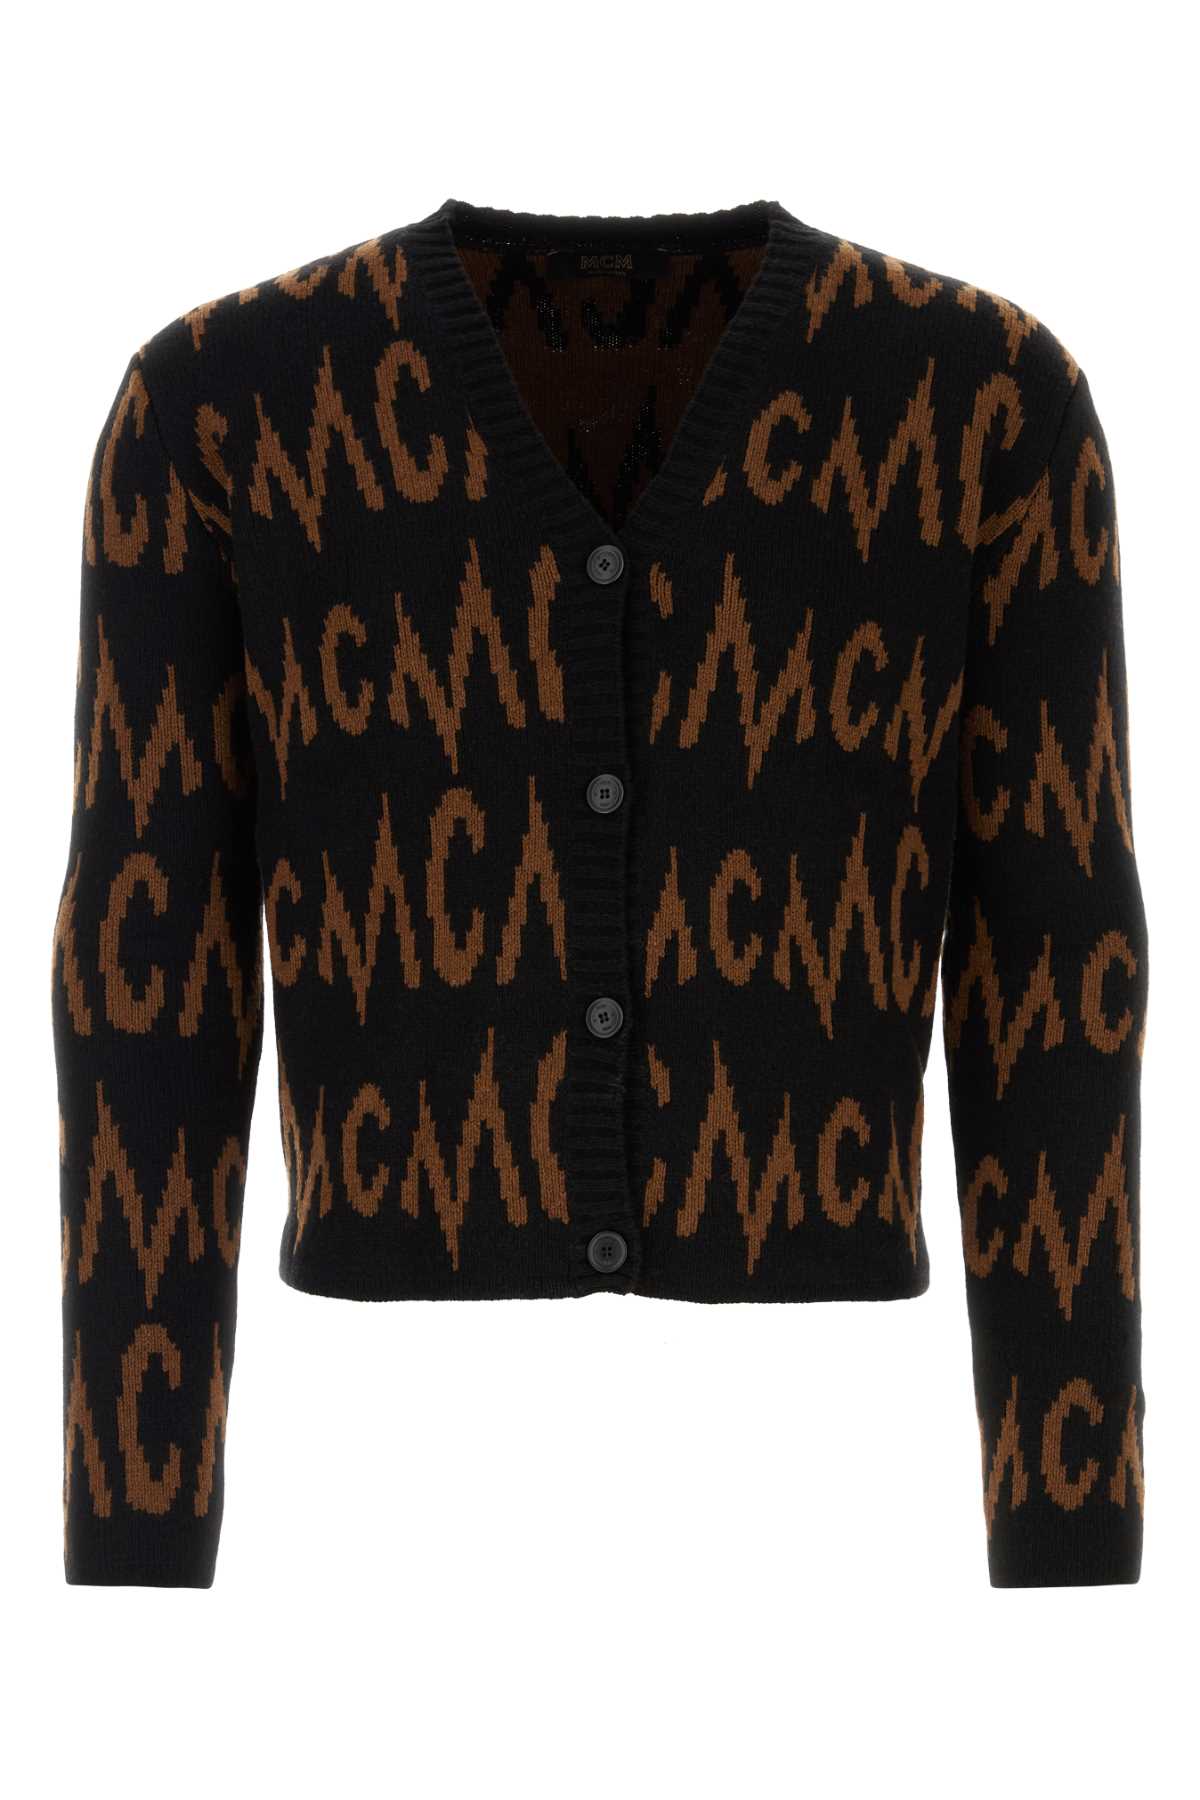 MCM Embroidered Cashmere Blend Cardigan